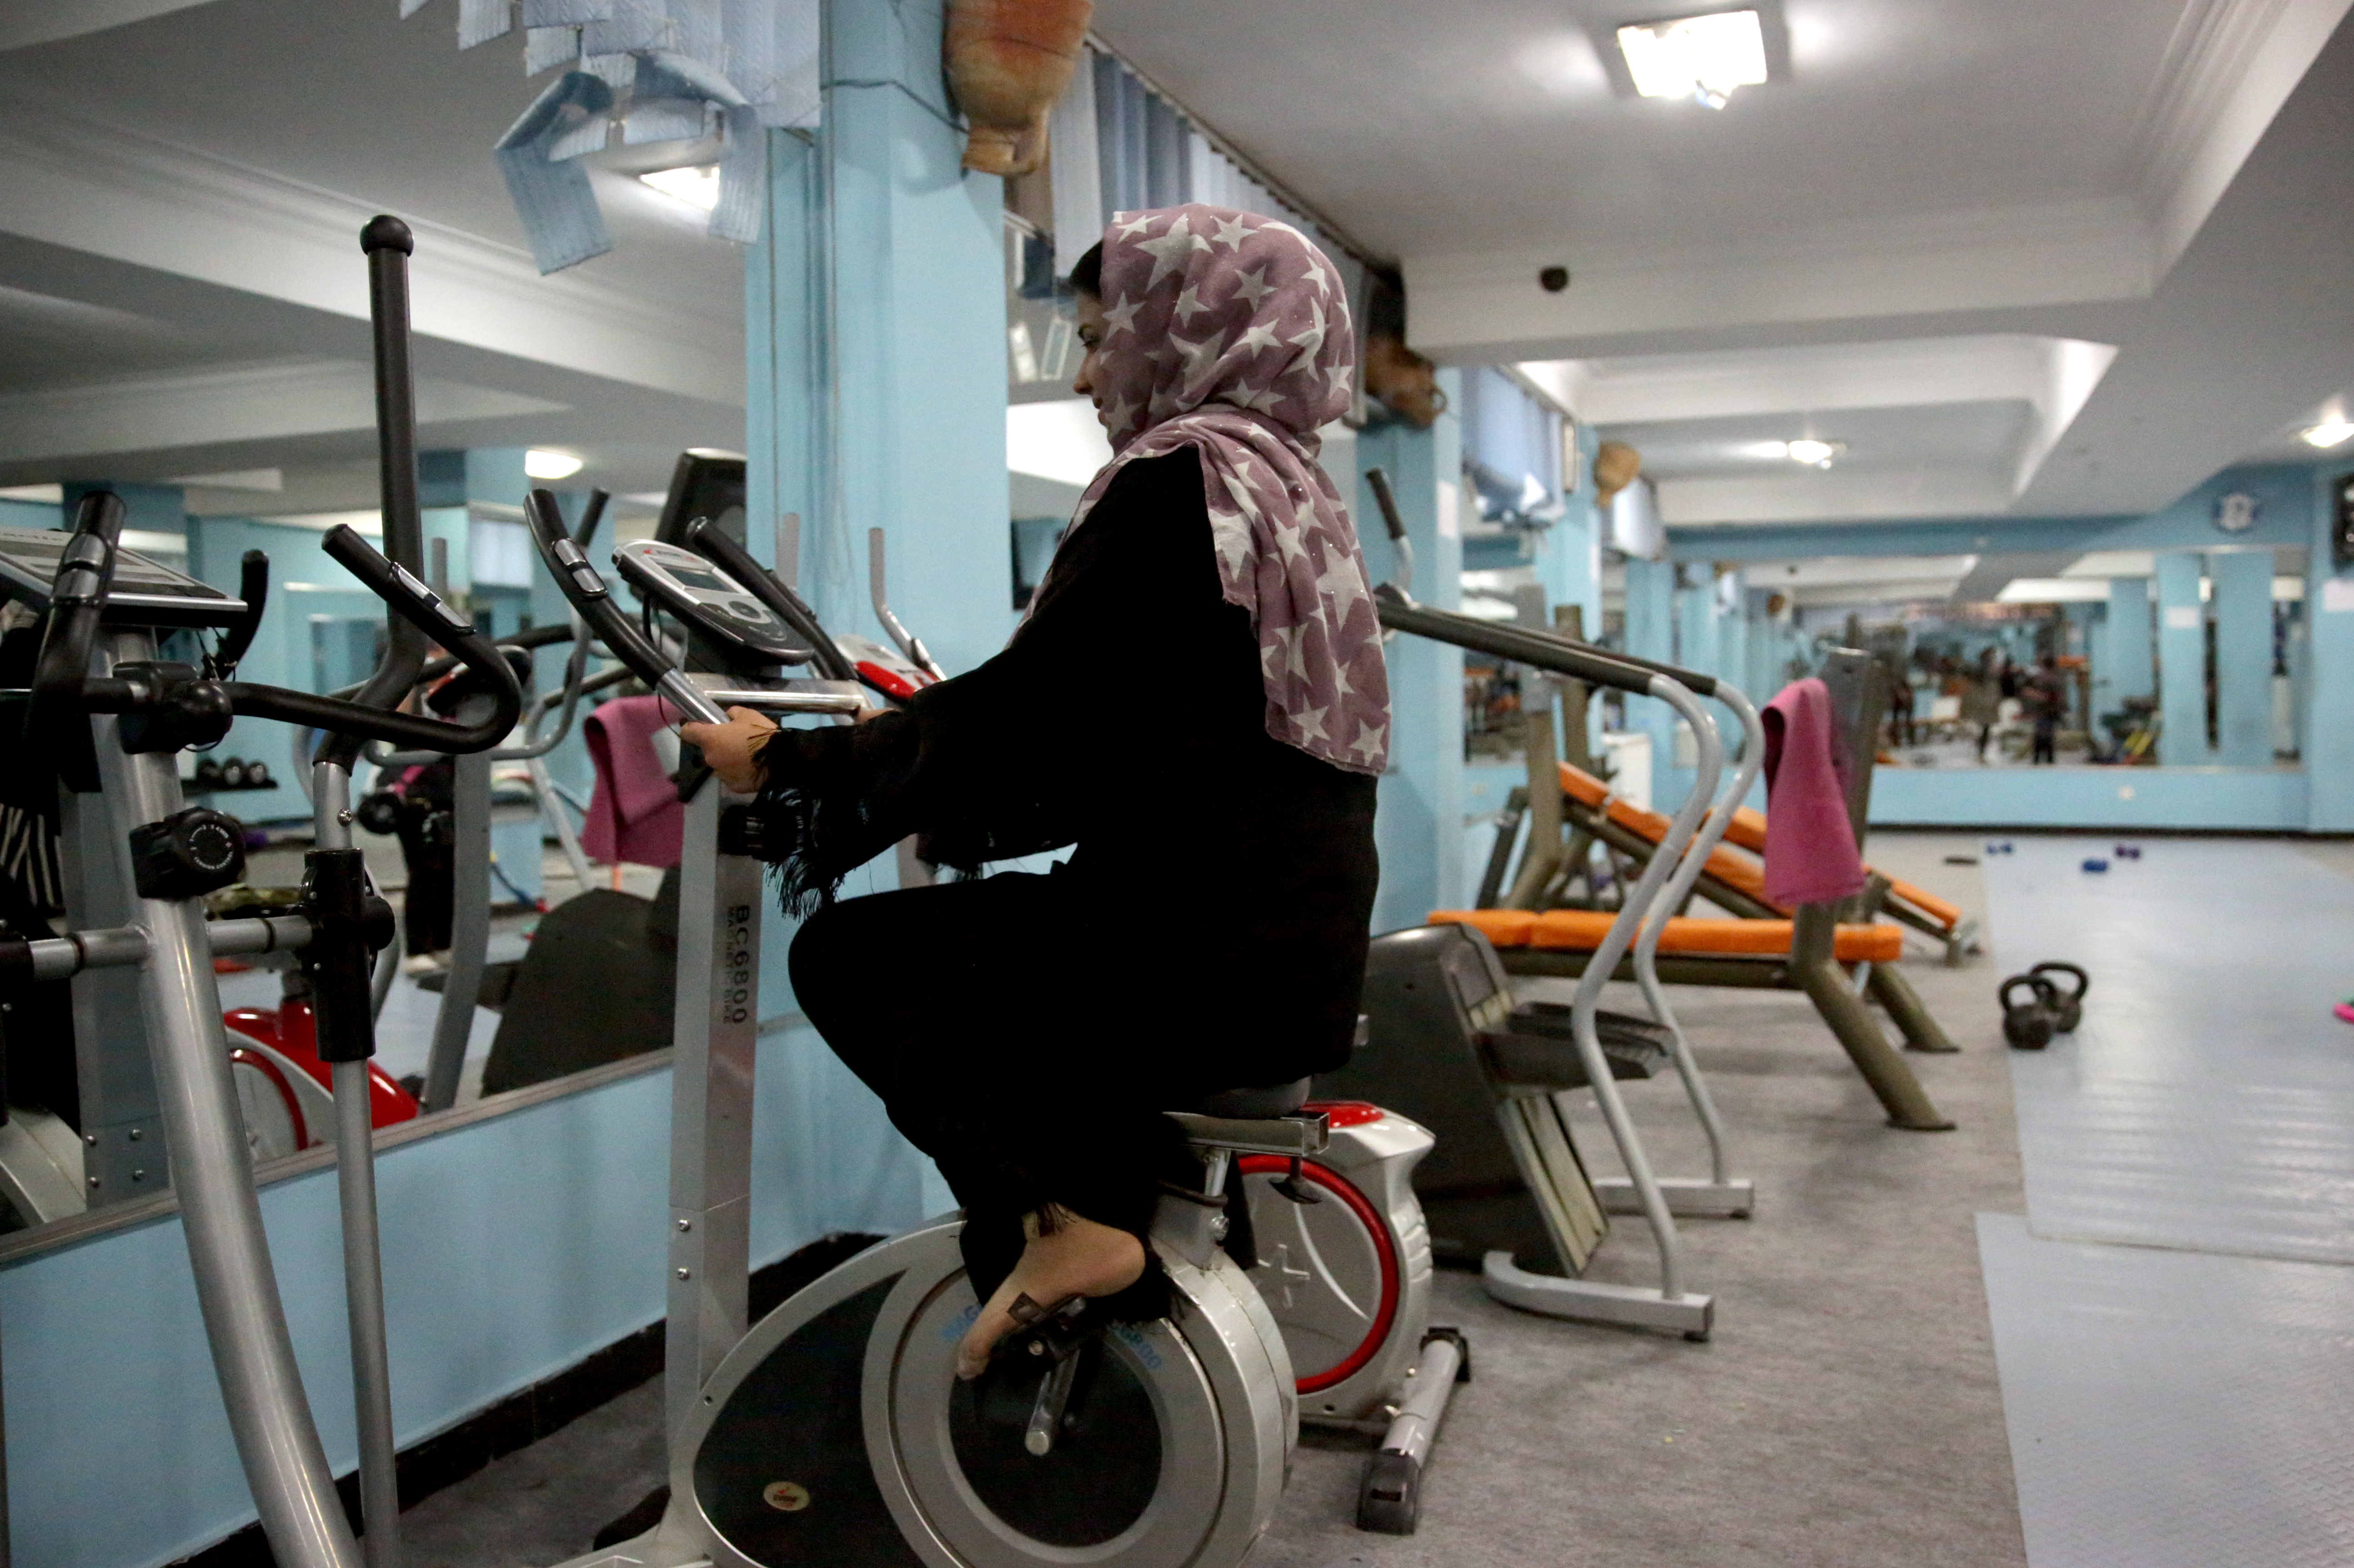 Taliban ban women from going to gyms